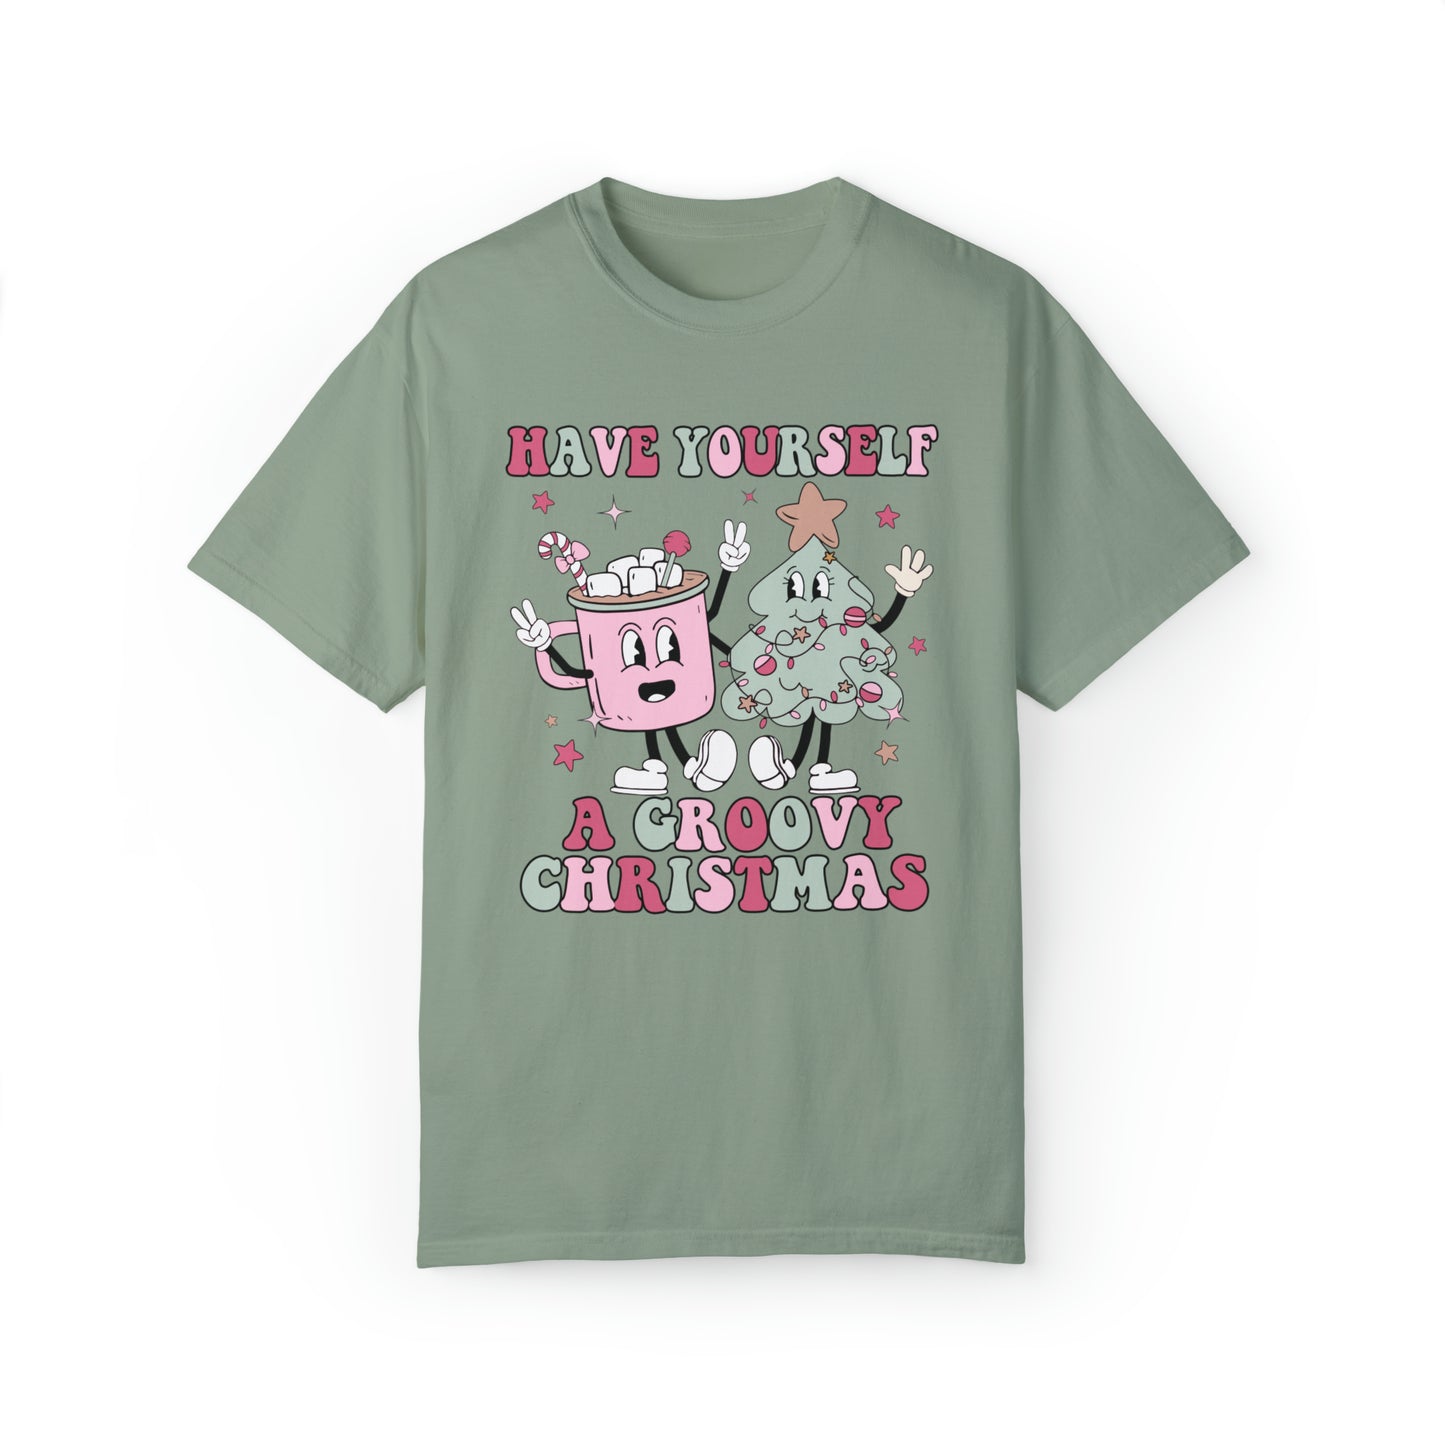 Have Yourself a Groovy Christmas Comfort Colors Short Sleeve Tee